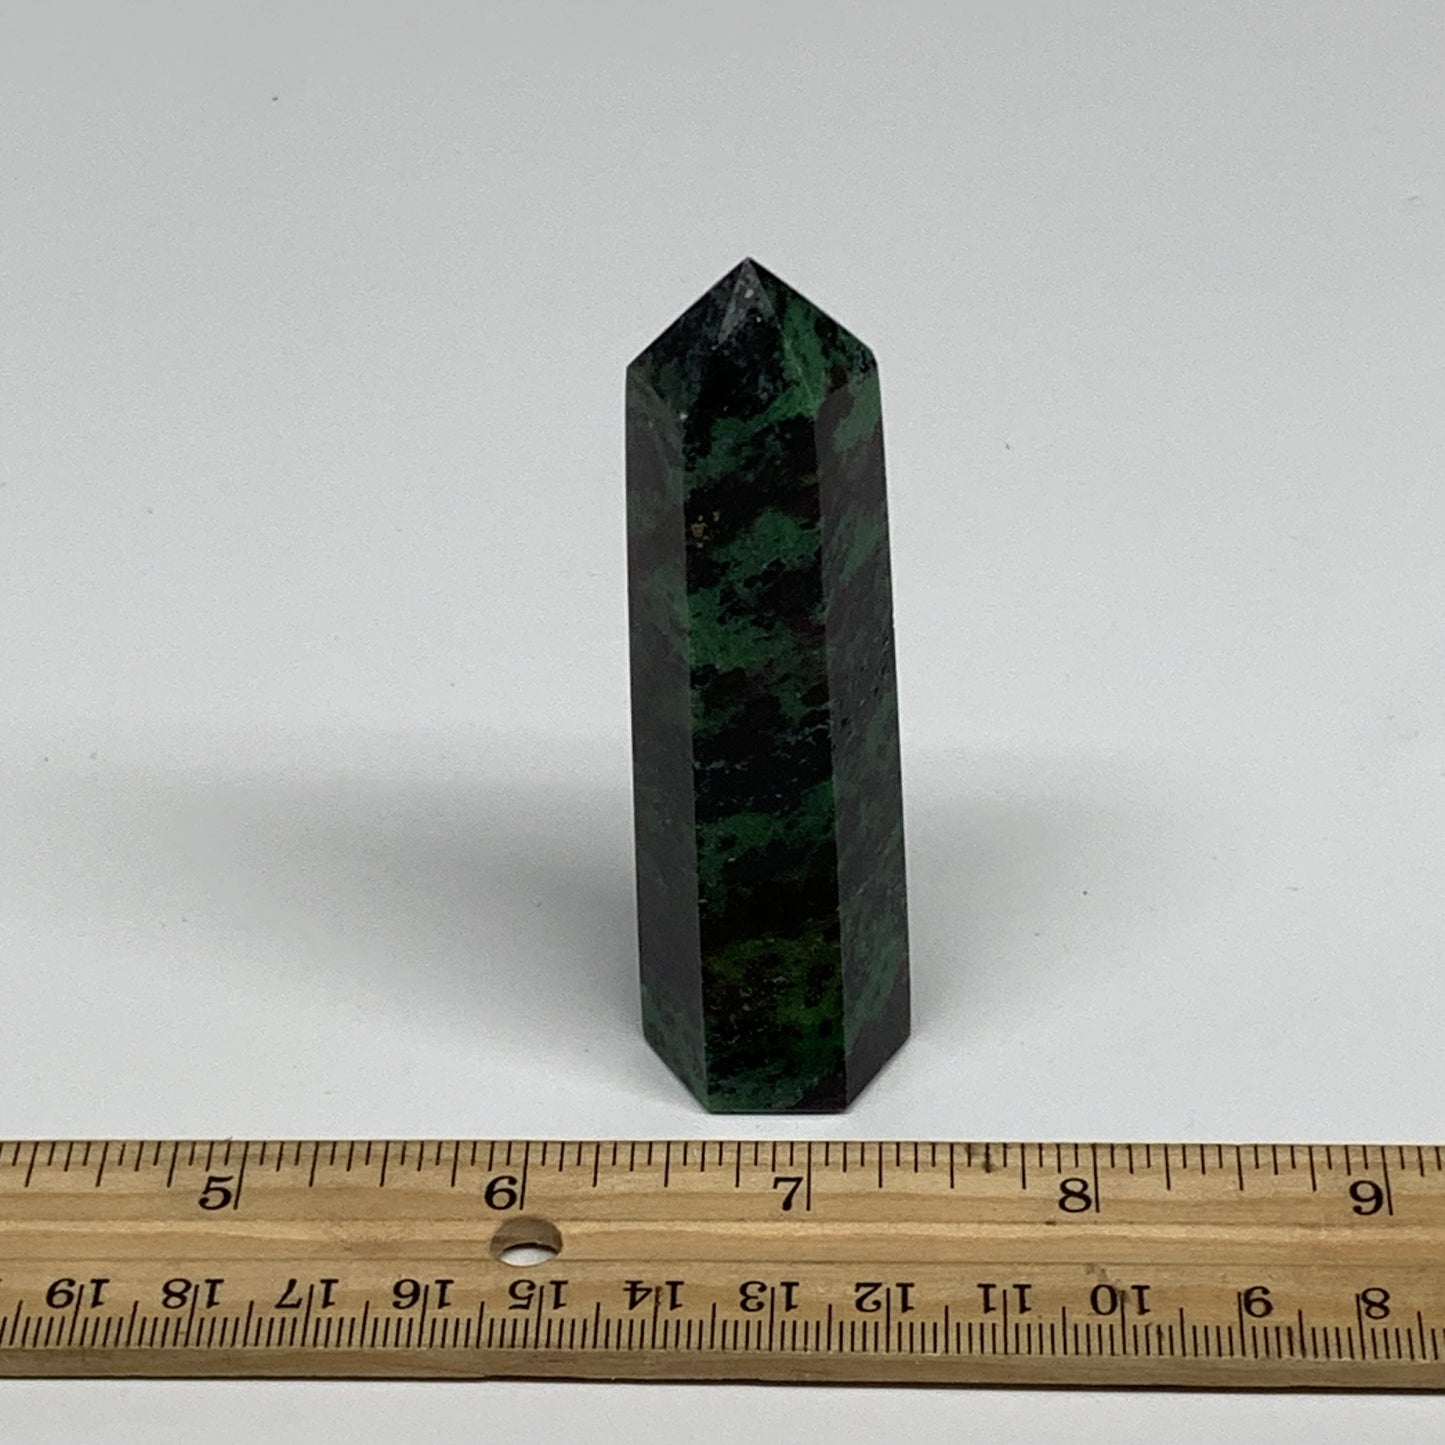 90.6g, 3.3"x0.9", Natural Ruby Zoisite Tower Point Obelisk @India, B31437